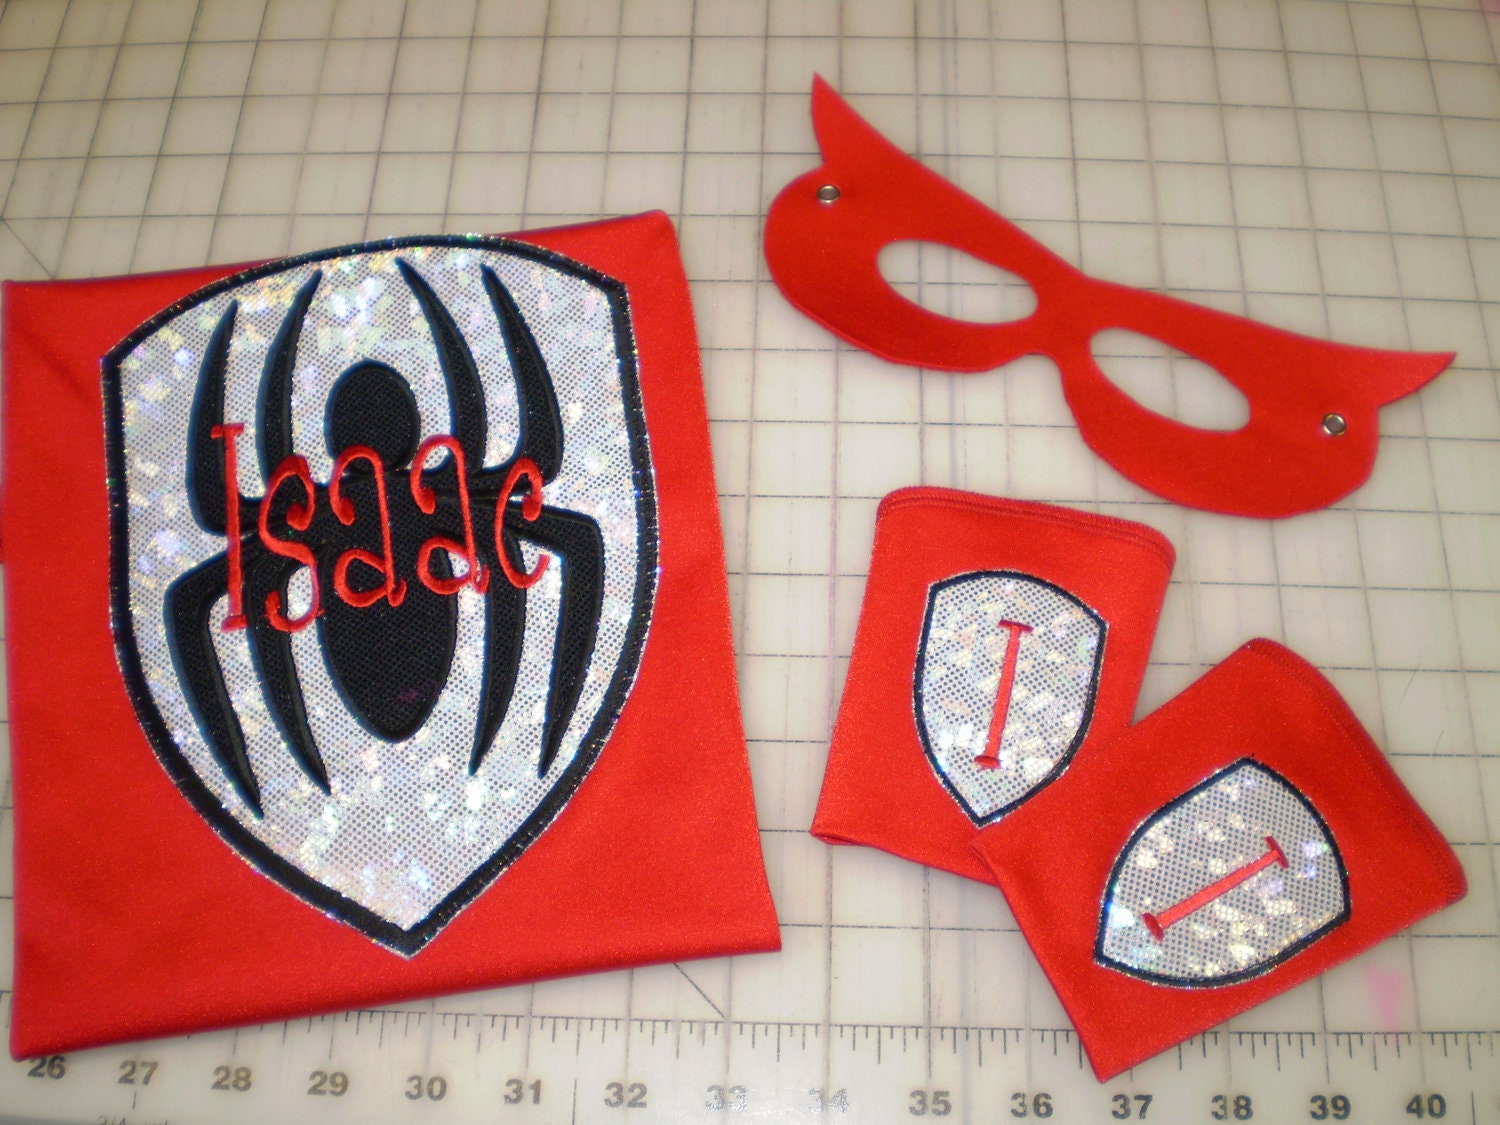 Superhero Cape, Mask and Super Power Cuffs - Spiderman Inspired  - Personalized